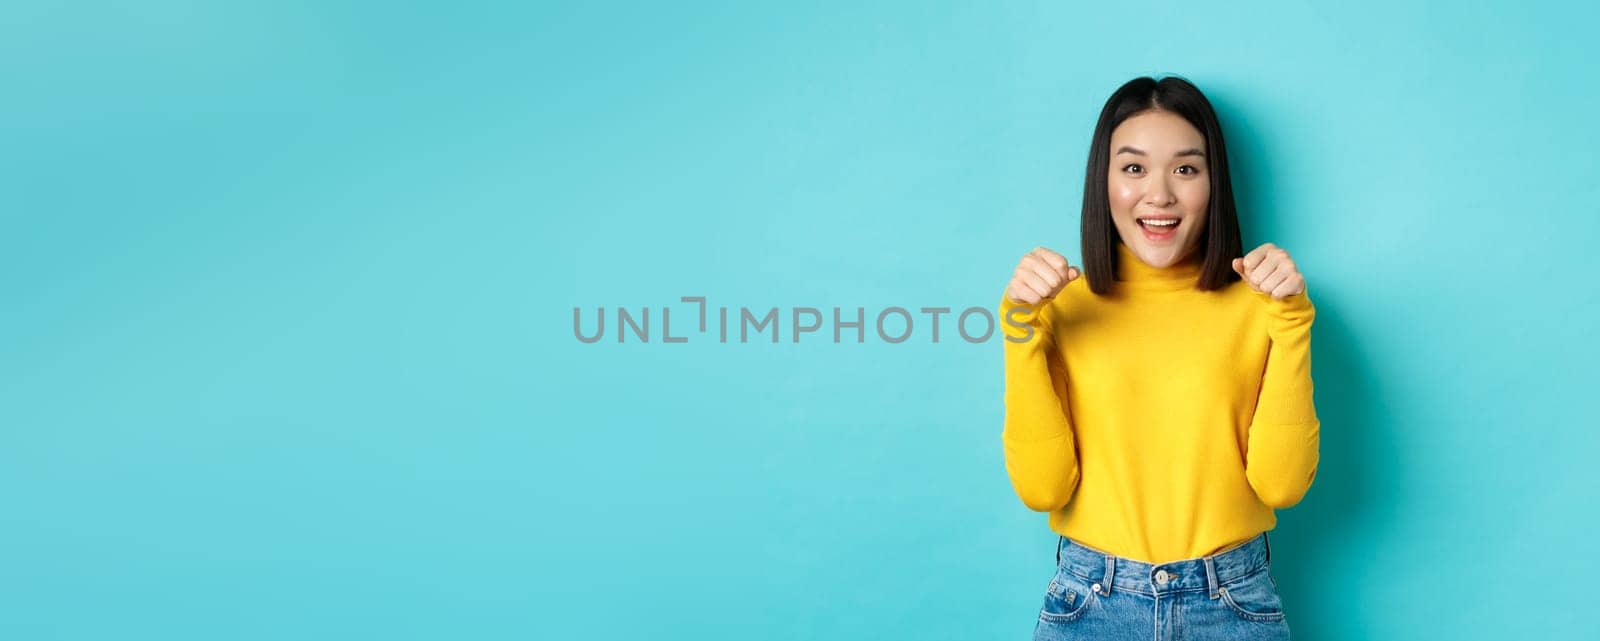 Beauty and fashion concept. Beautiful asian woman in yellow pullover raise hands as if holding logo, standing over blue background.